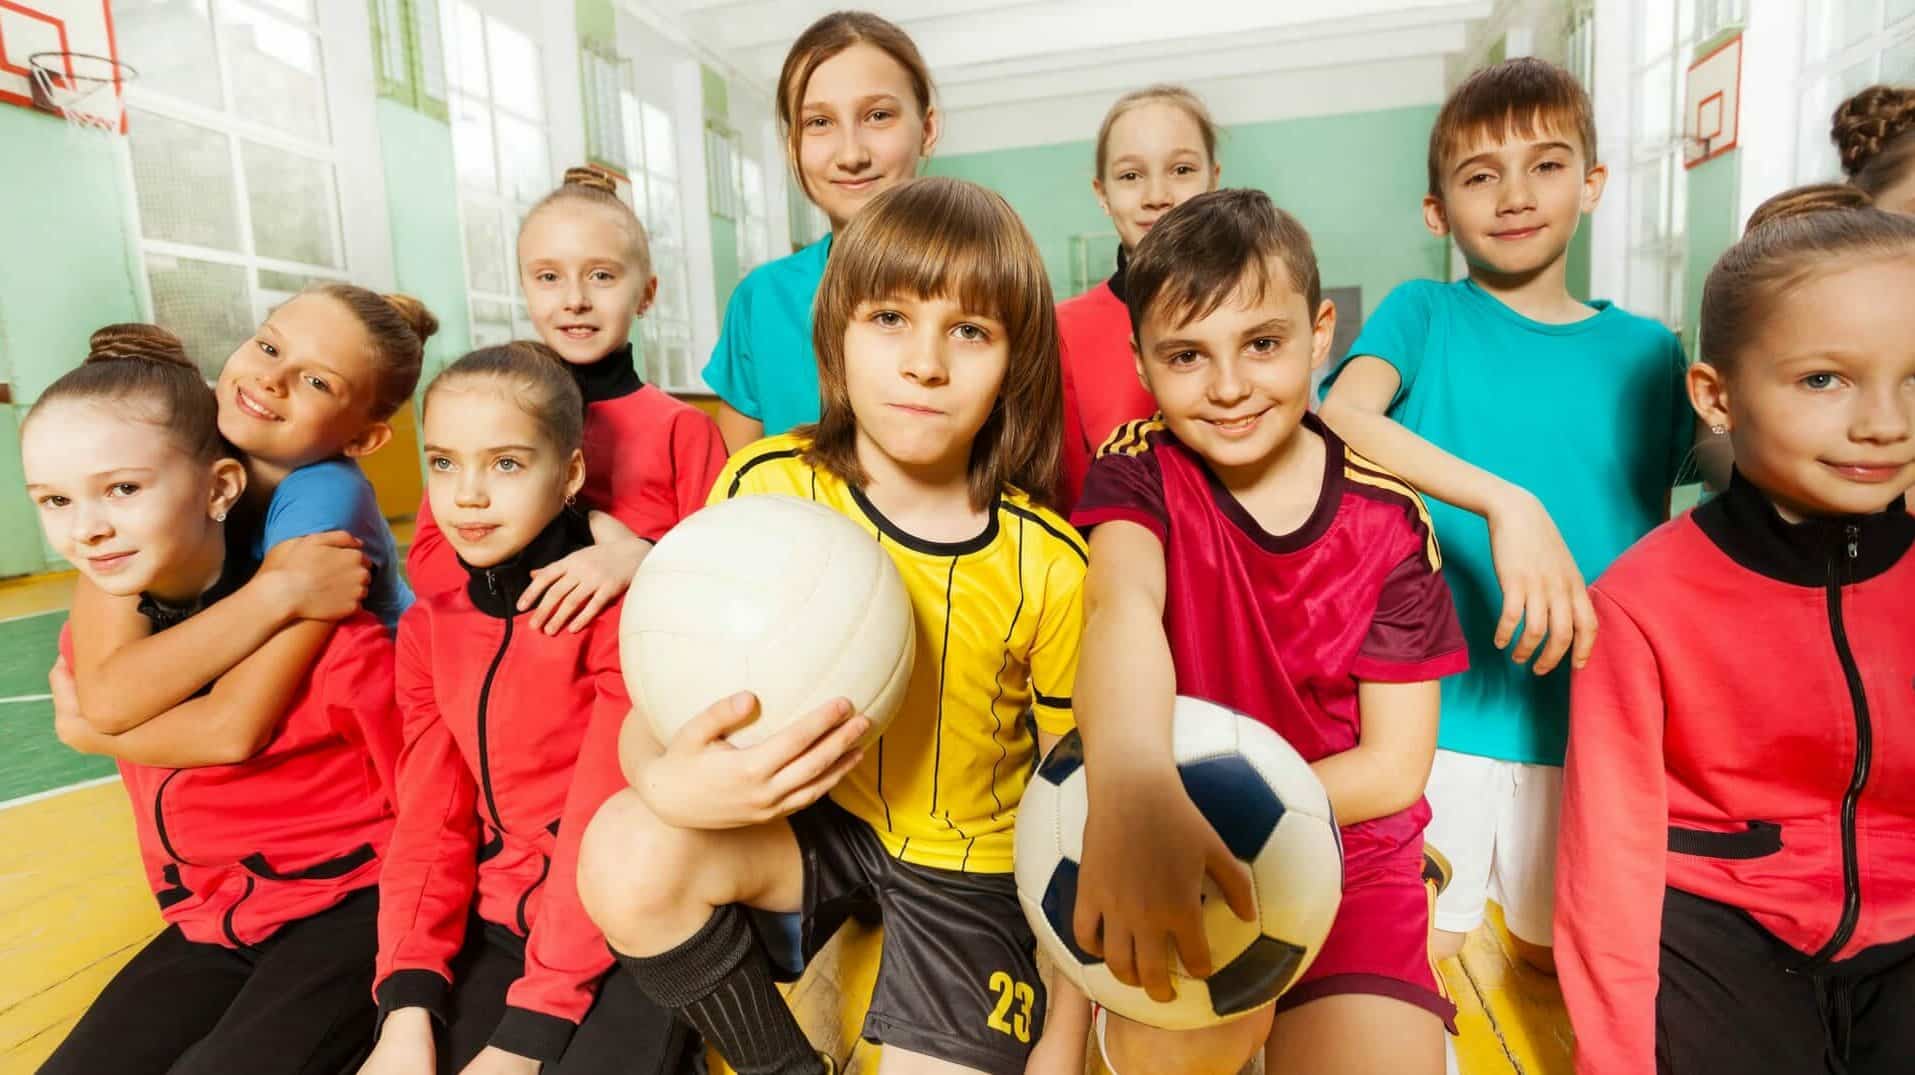 why should physical education not be mandatory in schools